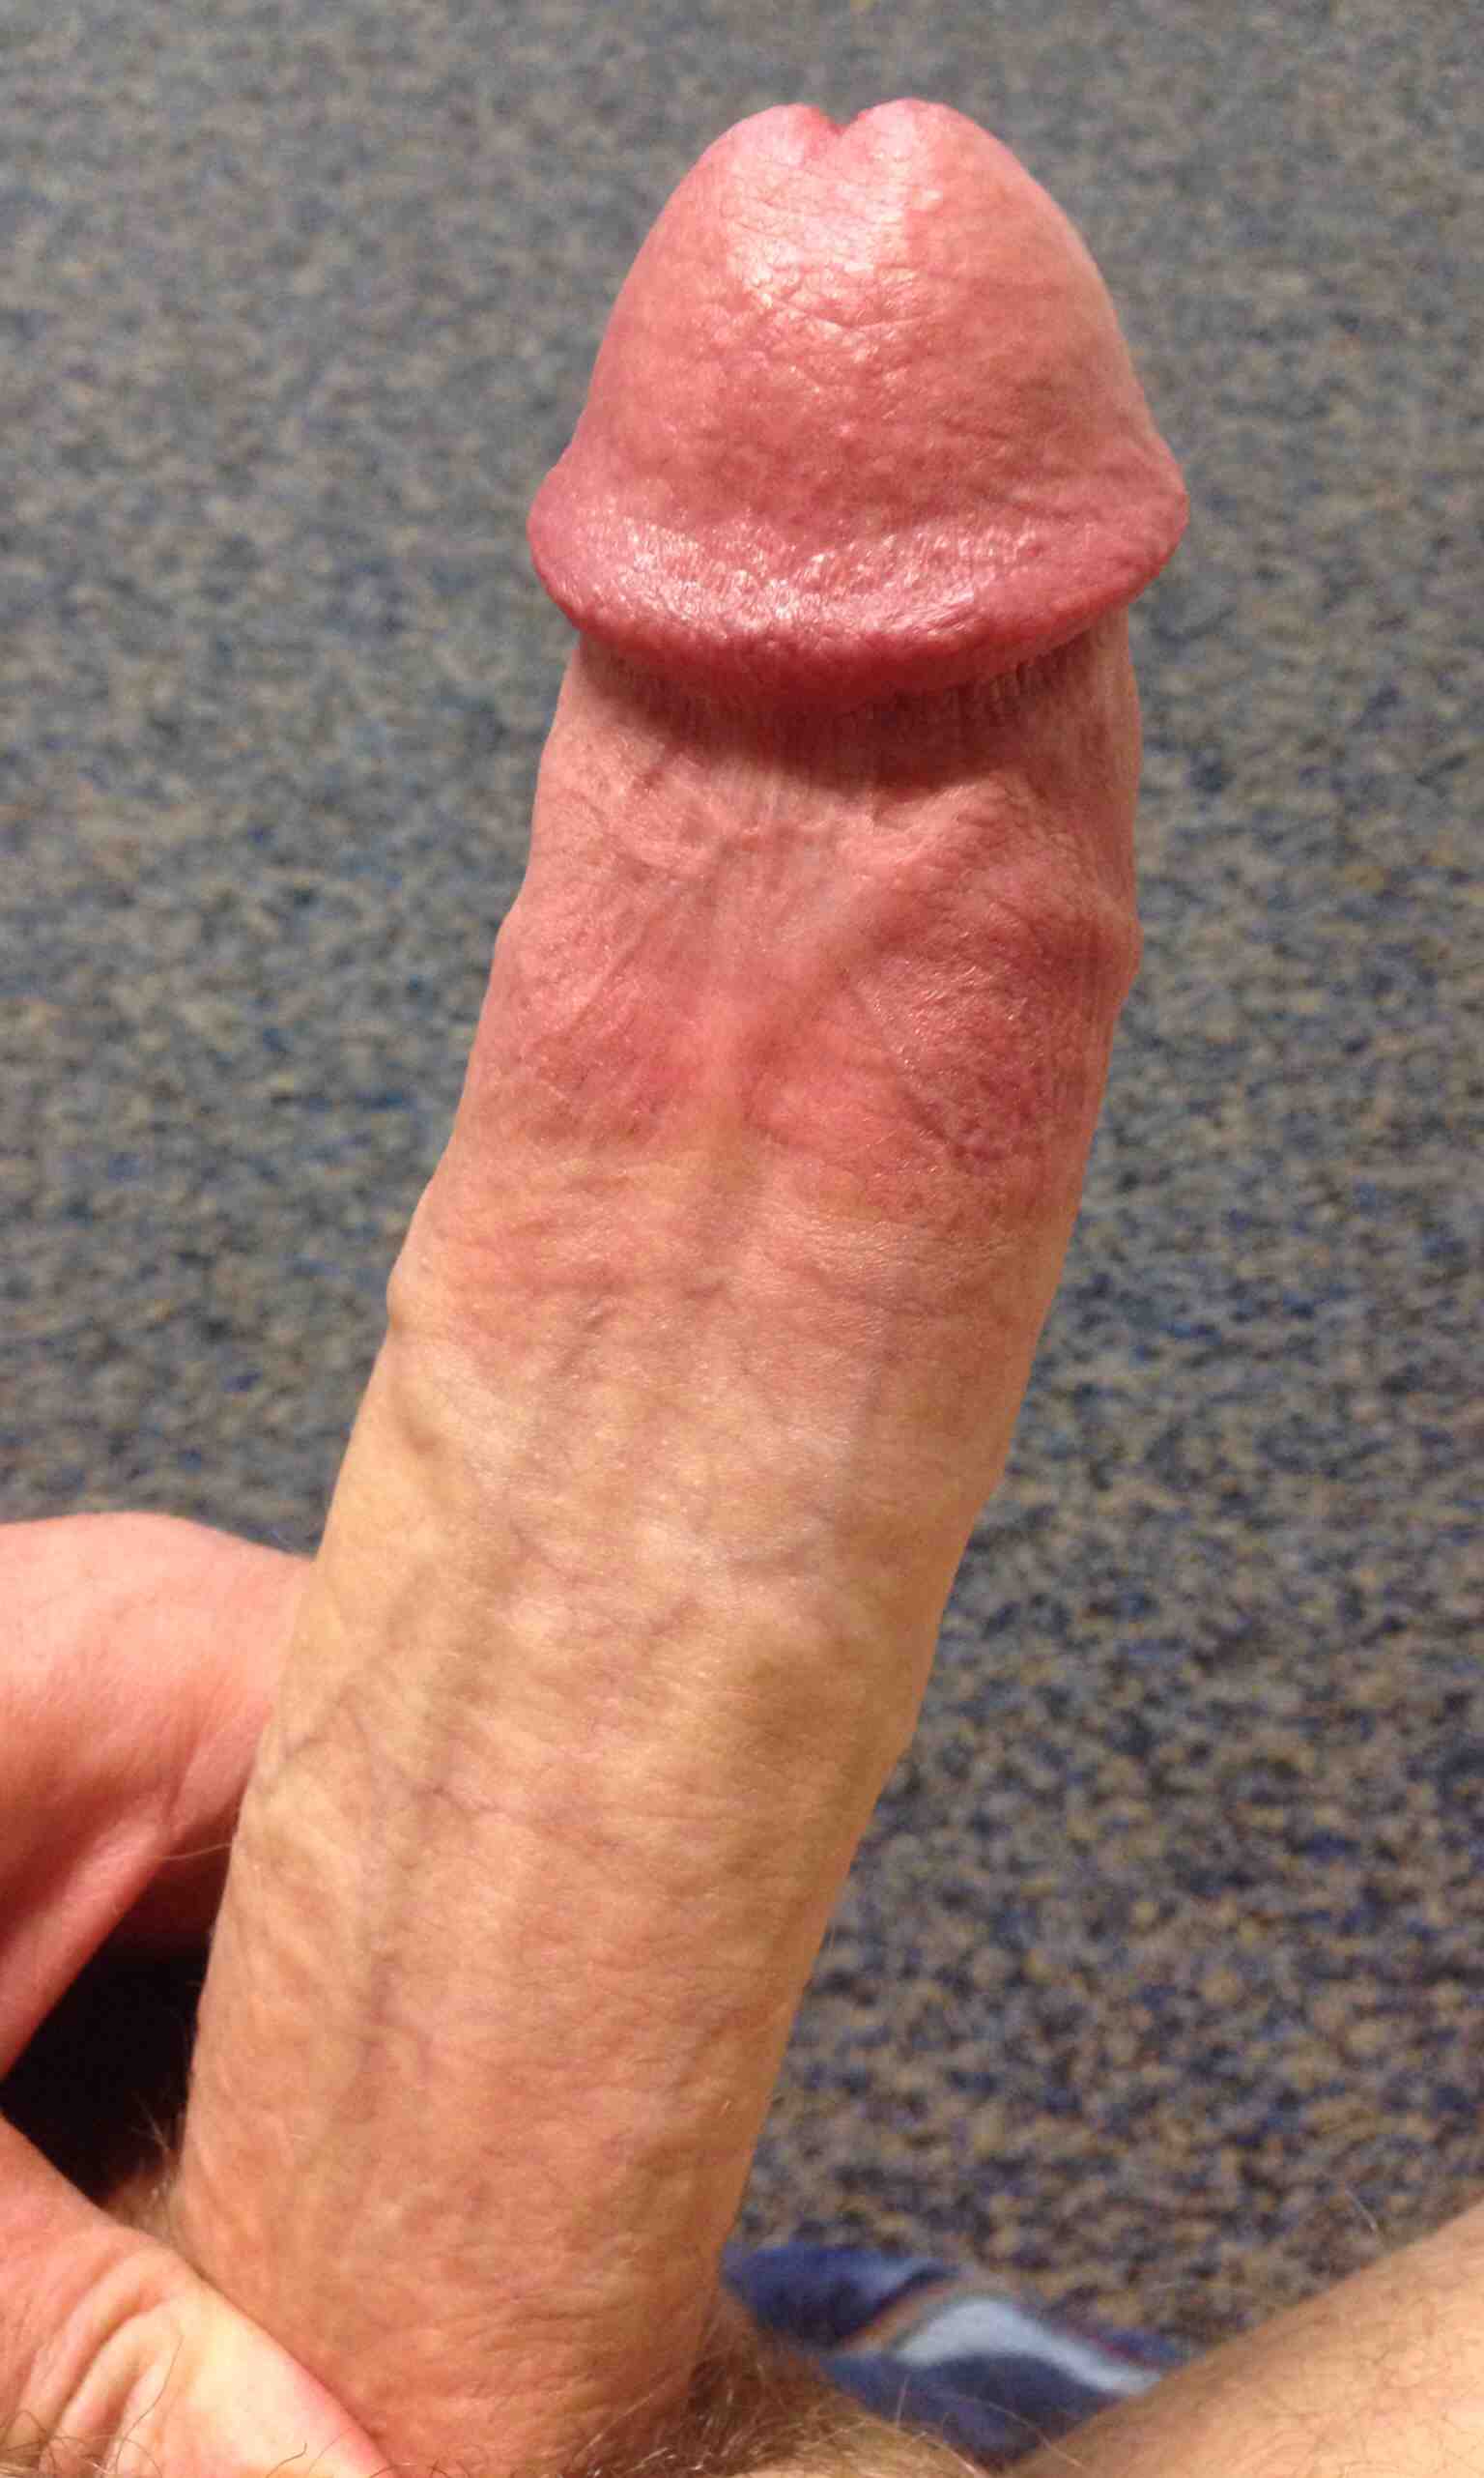 galleries small flaccid cock selfie xxx gallery pic